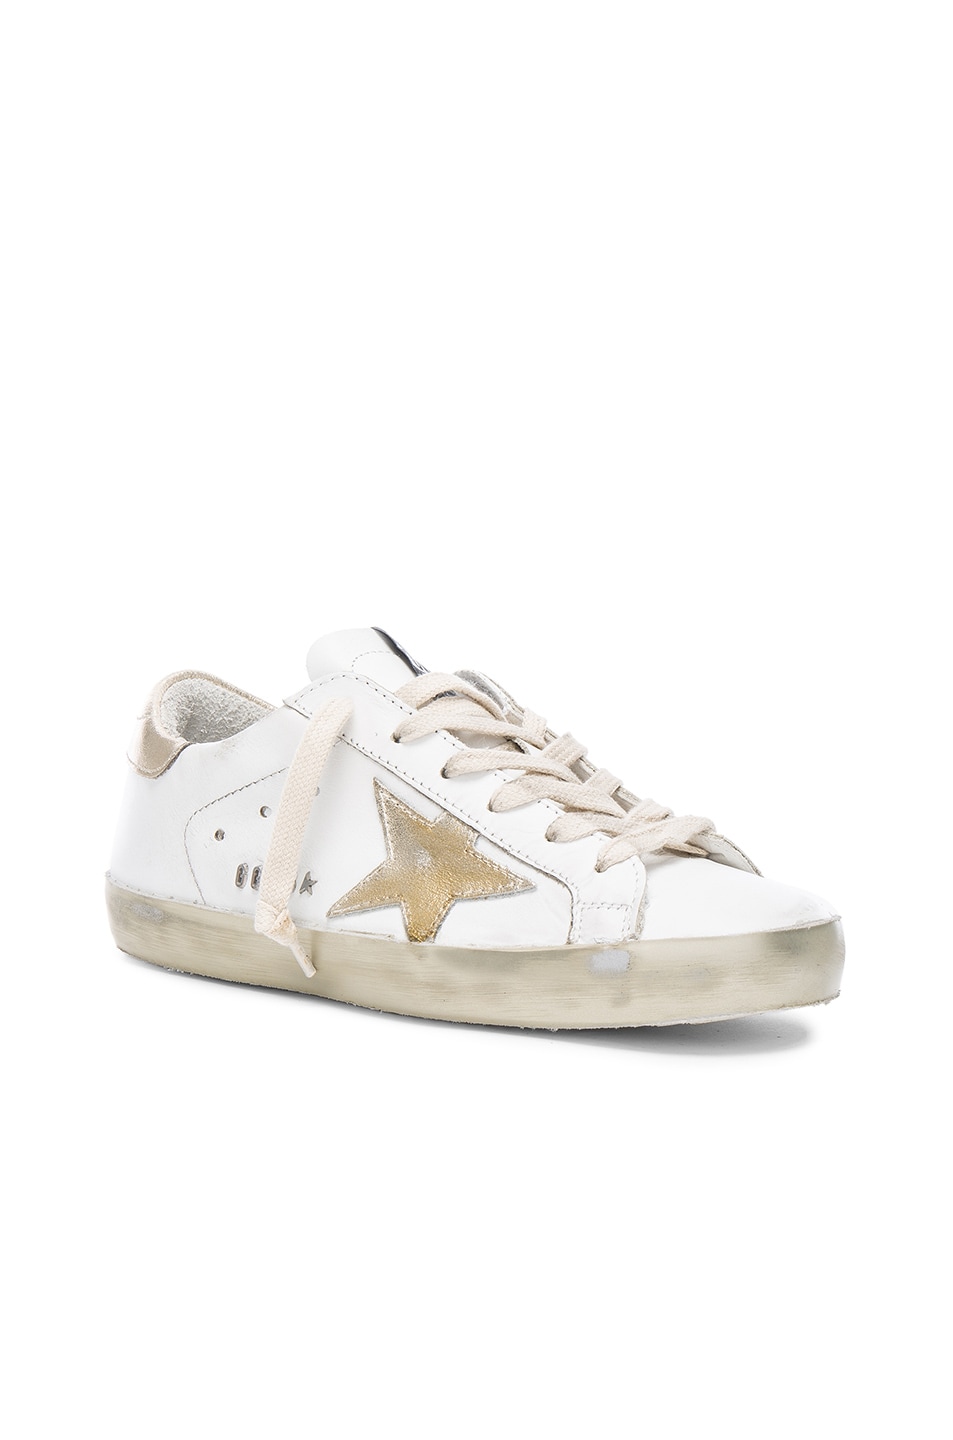 white sneakers gold stars